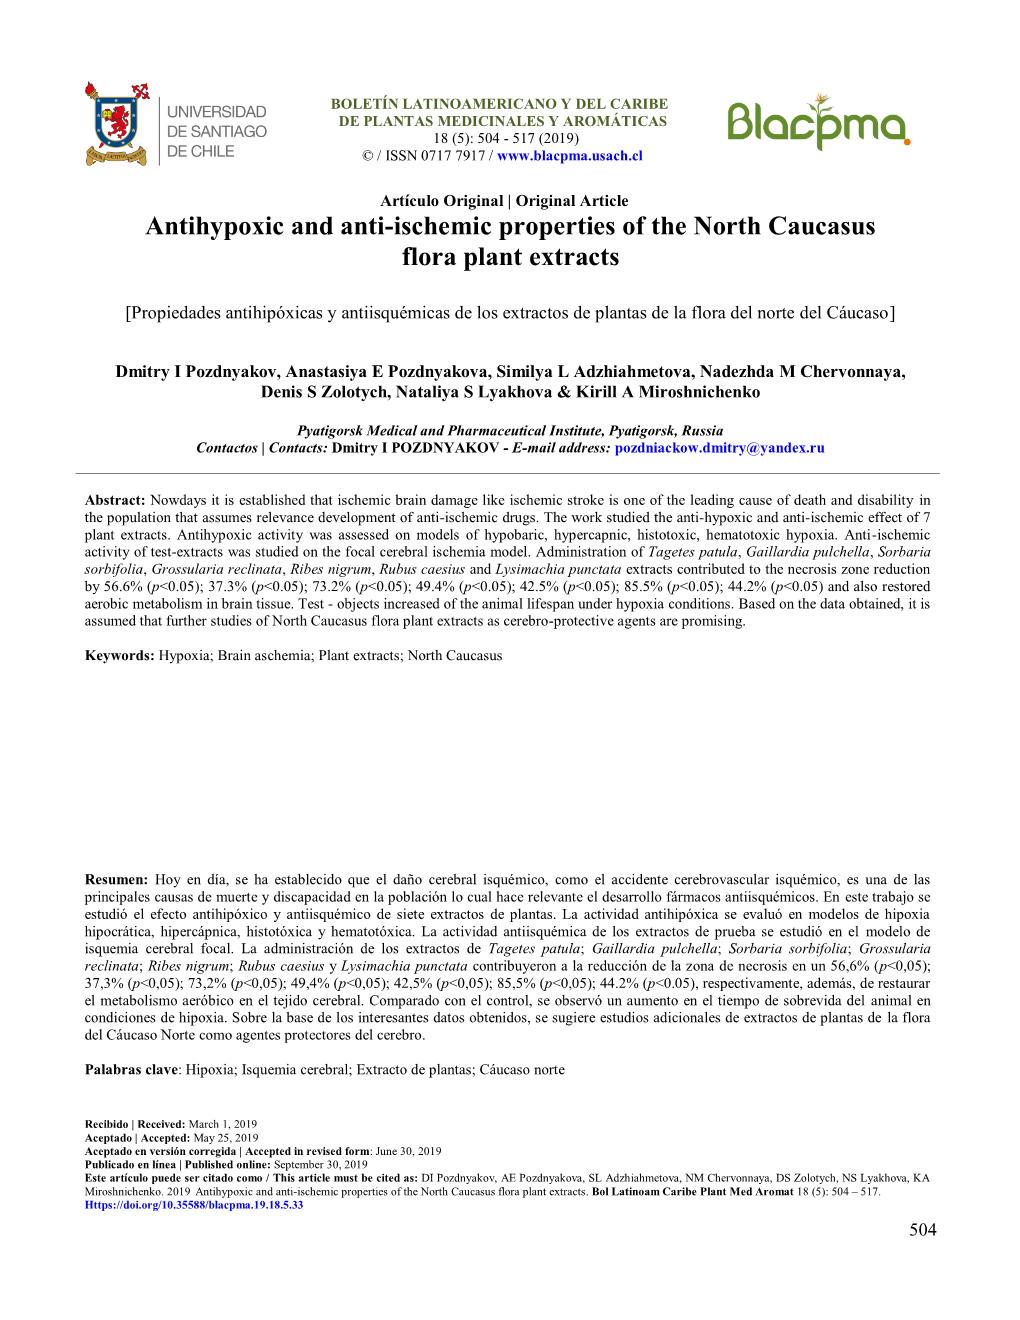 Antihypoxic and Anti-Ischemic Properties of the North Caucasus Flora Plant Extracts